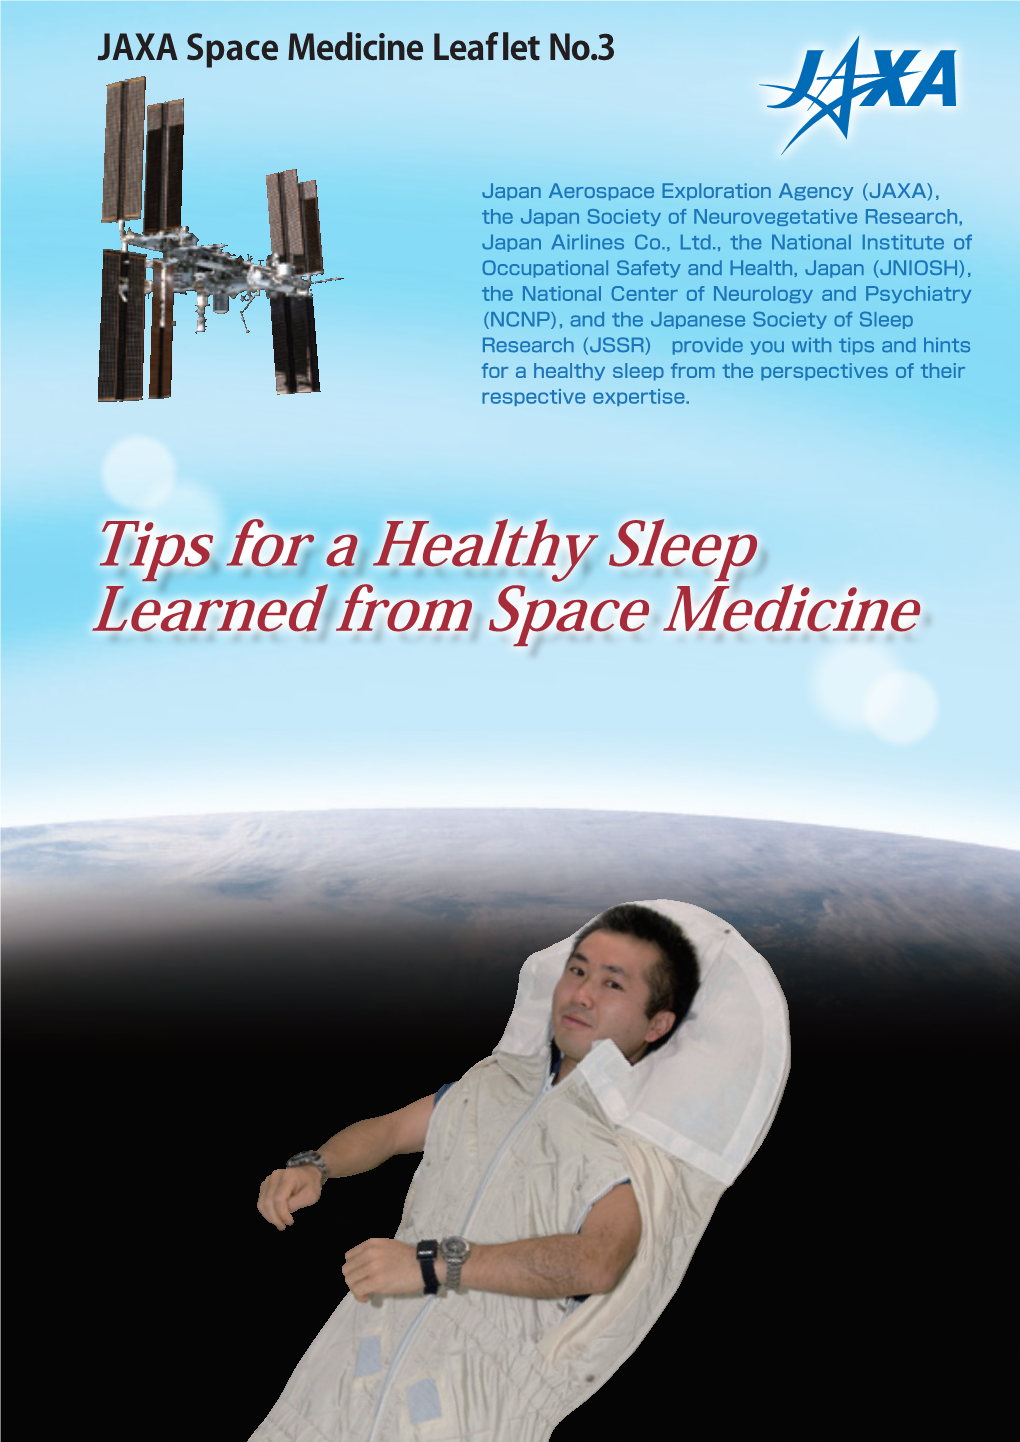 Tips for a Healthy Sleep Learned from Space Medicine